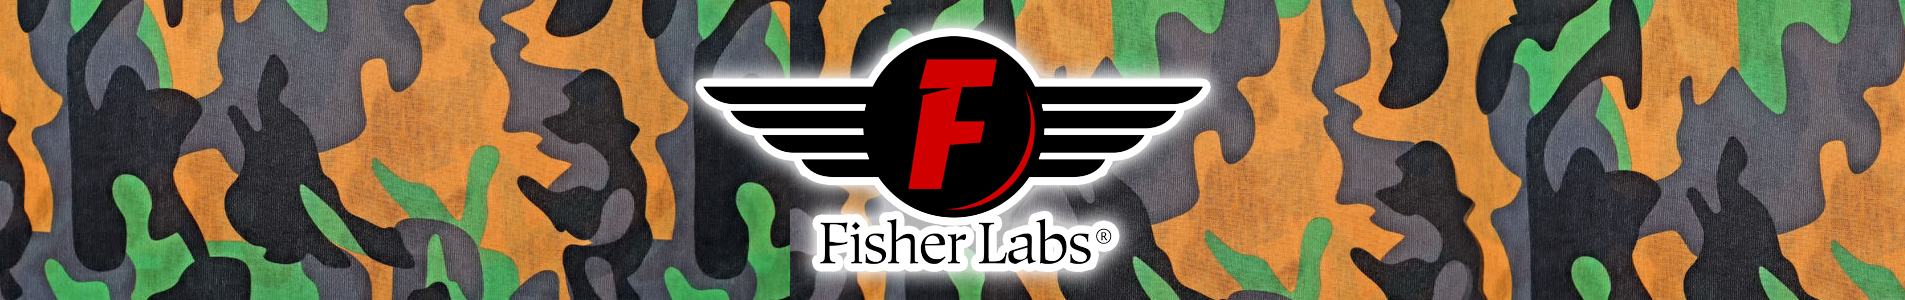 FISHER-LABS